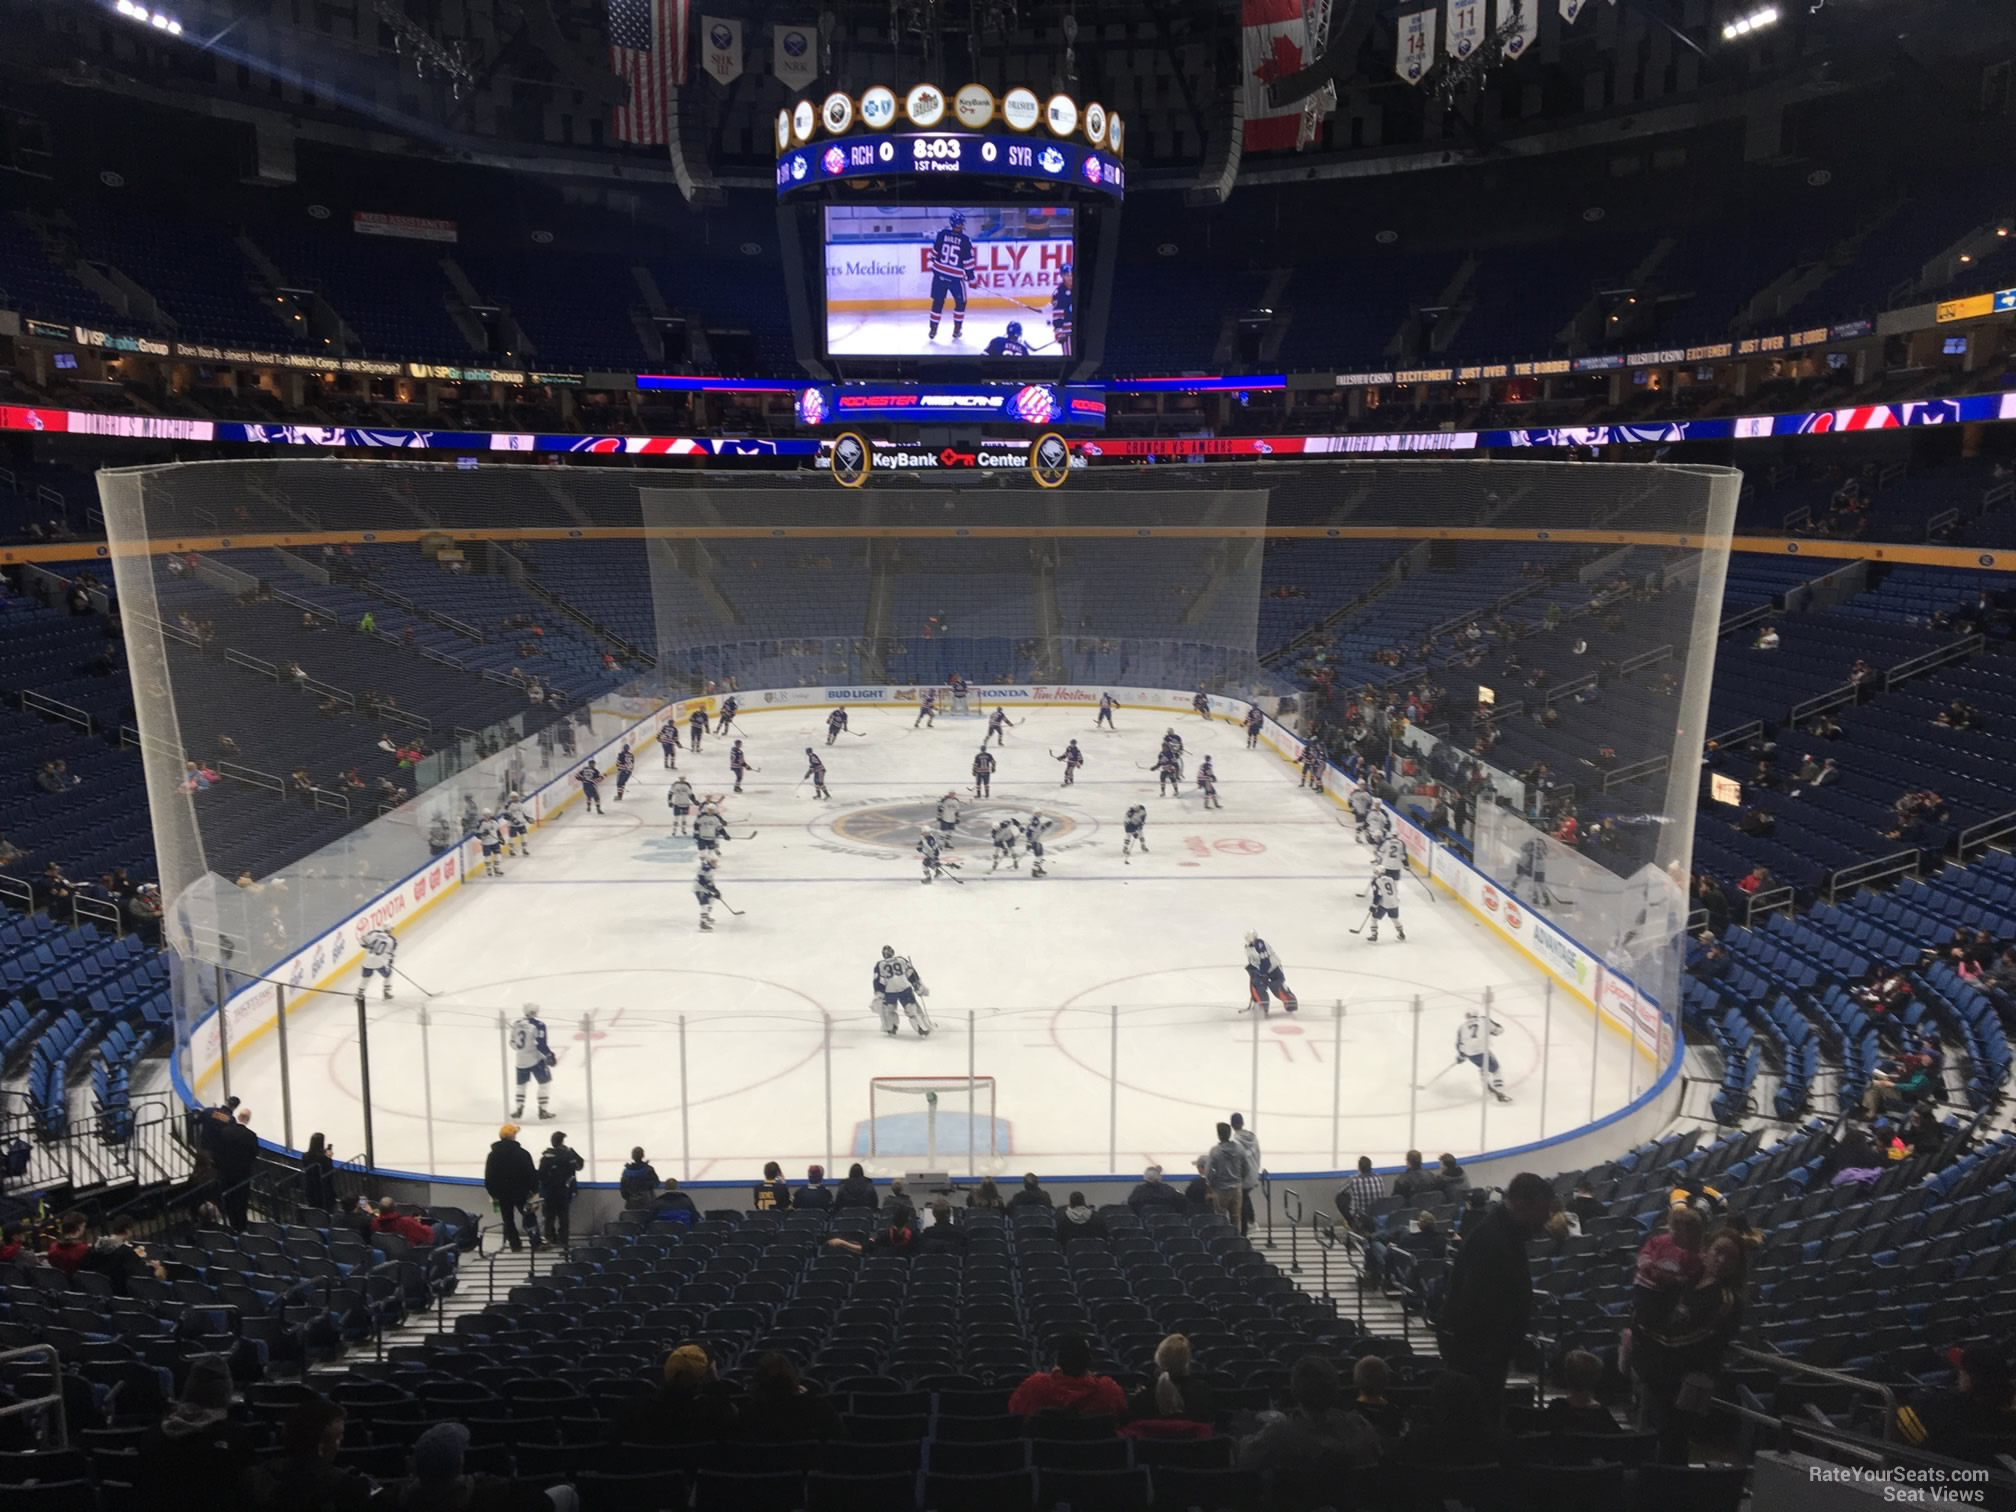 KeyBank Center Section 111 Row 22 on 2 21 2018f